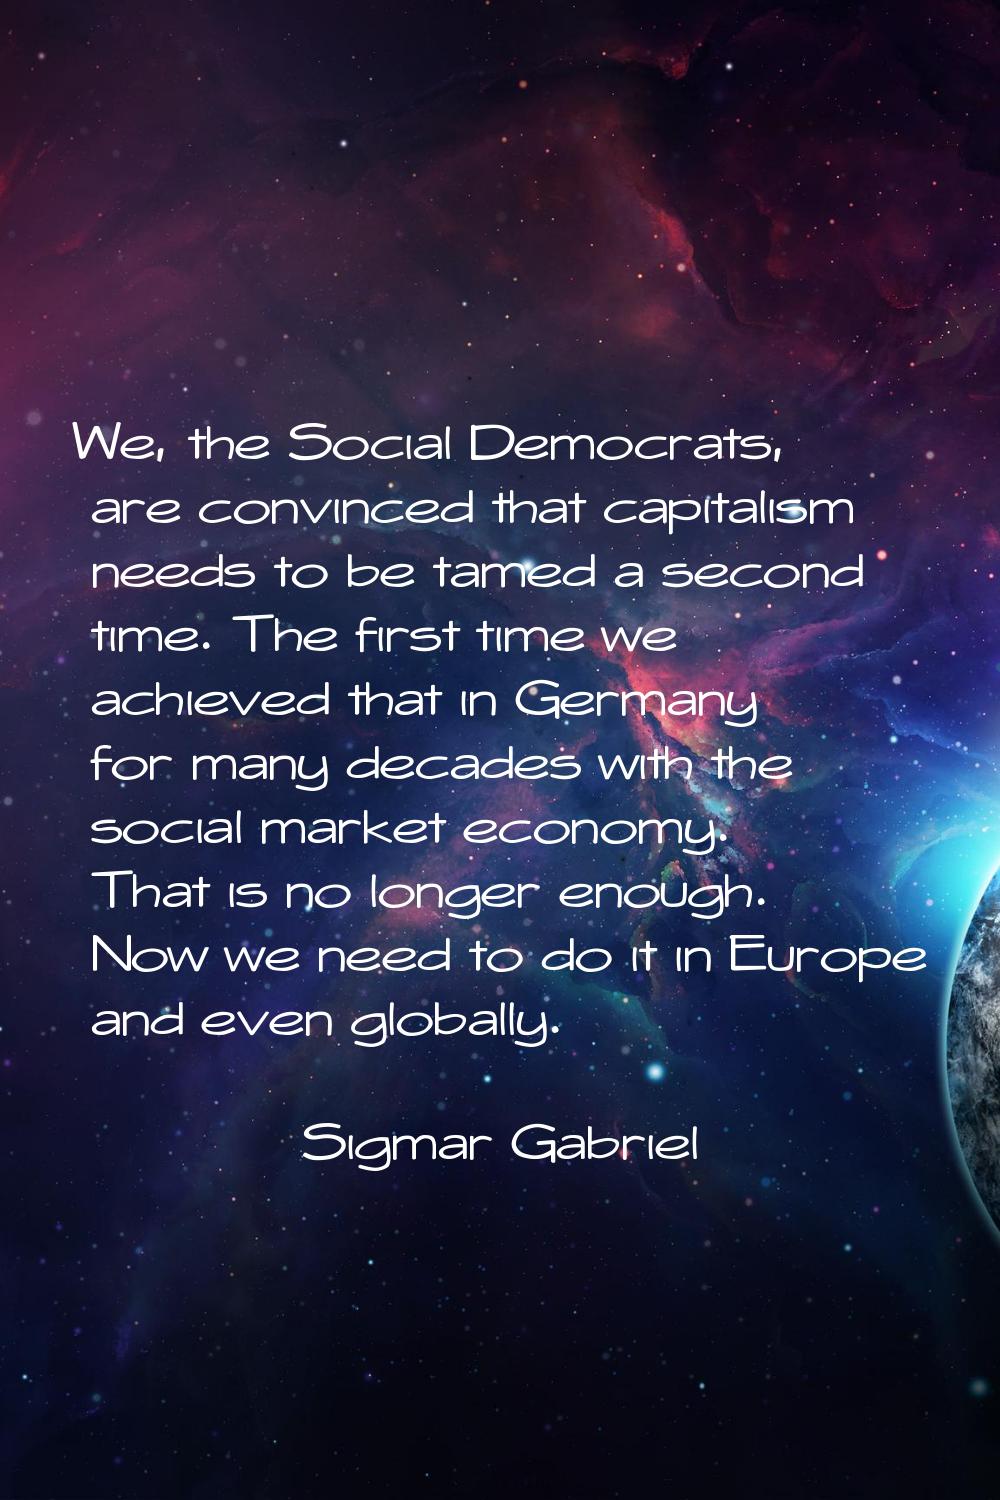 We, the Social Democrats, are convinced that capitalism needs to be tamed a second time. The first 